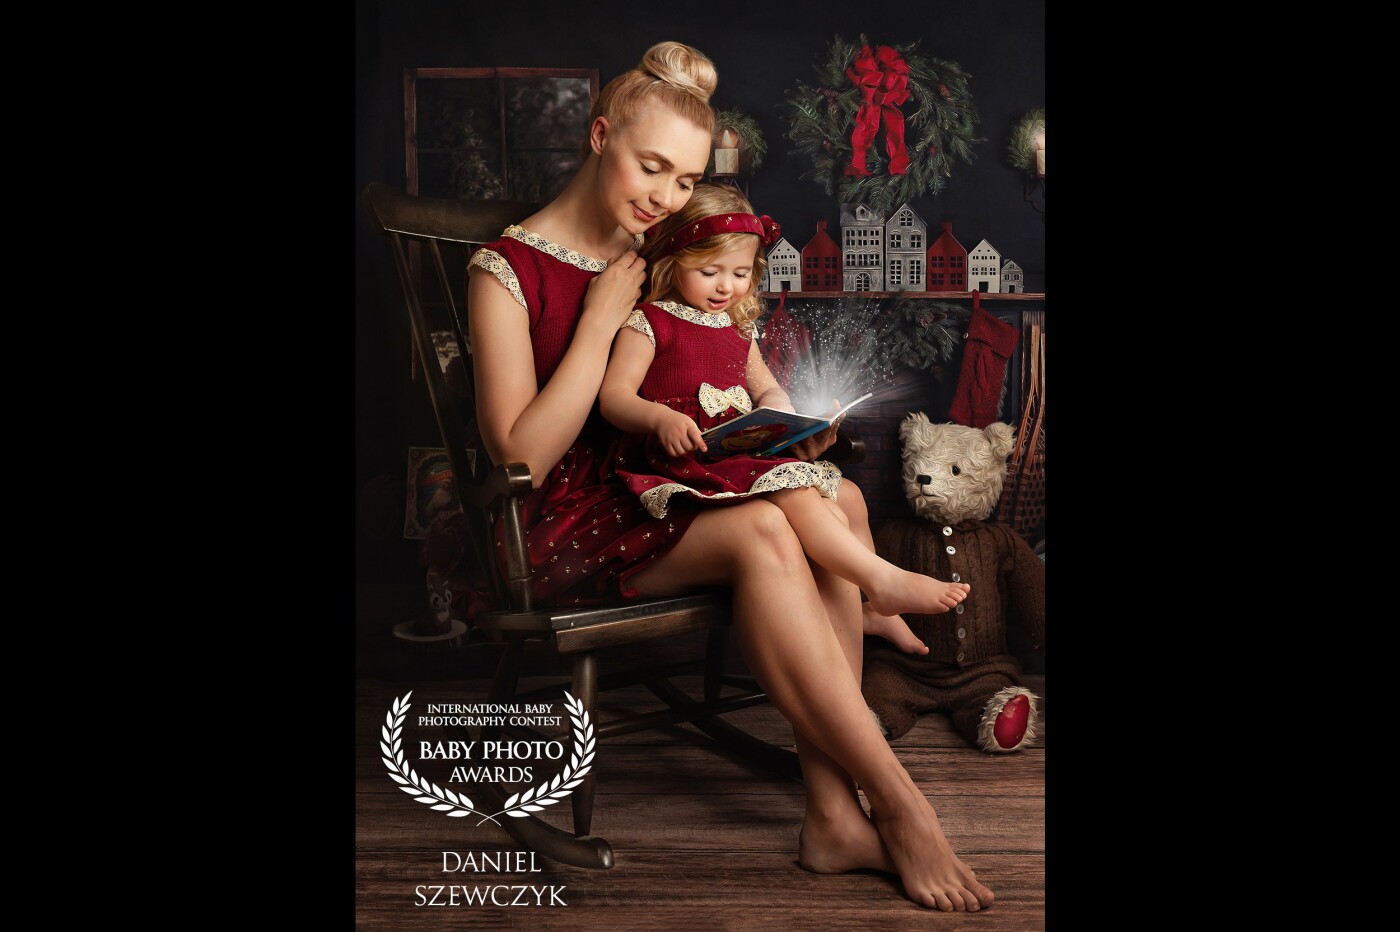 Inspired by Xmas time I took this beautiful image of my wife and my daughter. Outfits are hand made by my wife that makes that image even more special as we try to create a unique vintage-looking atmosphere in our photos. 